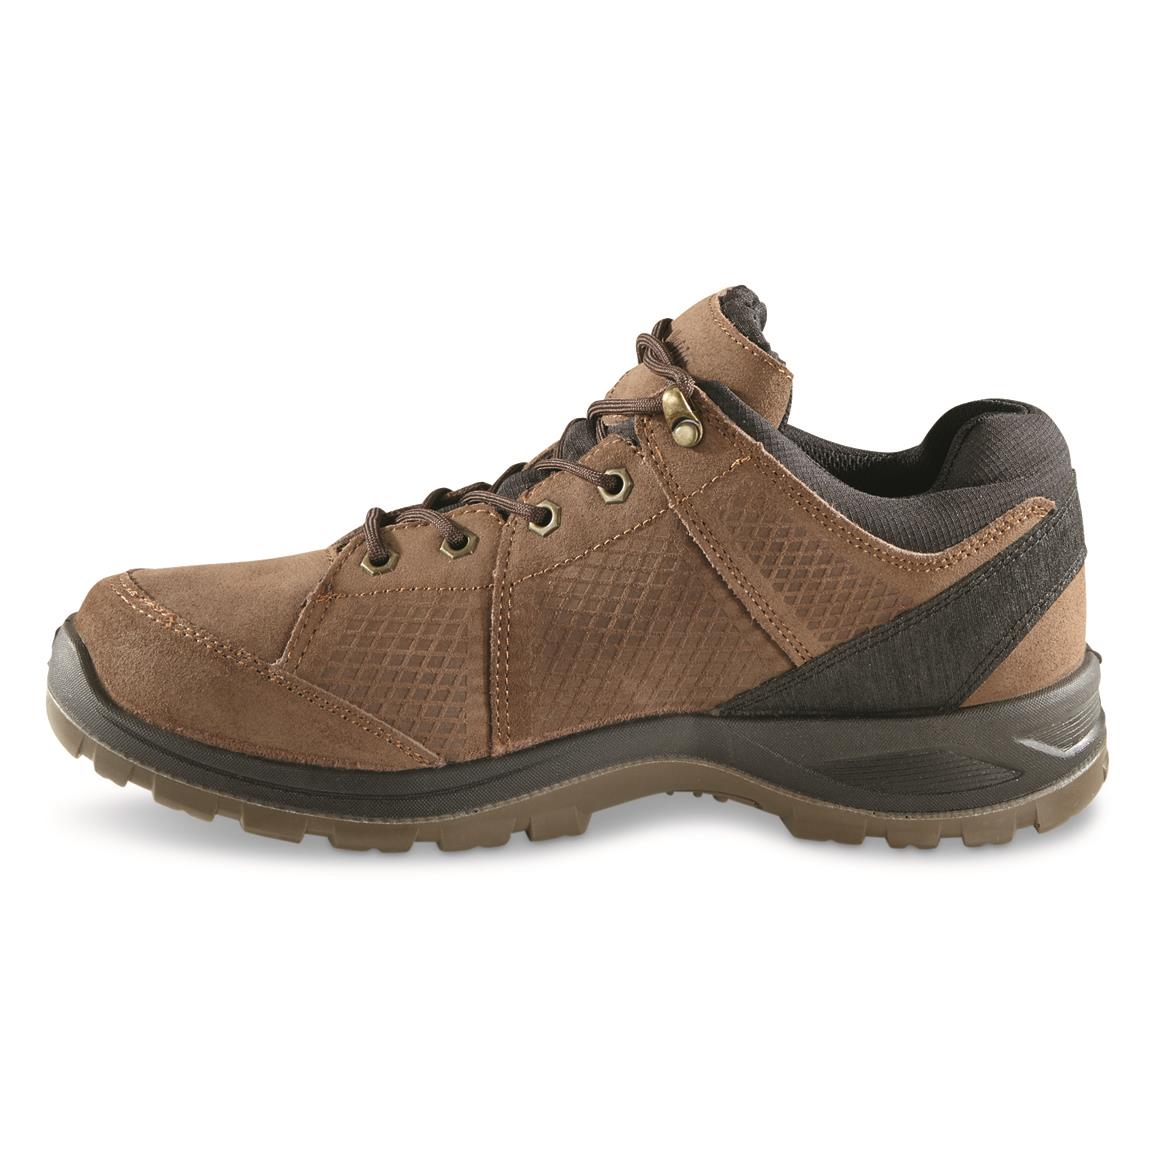 Northside Men's Arlow Canyon Low Hiking Shoes - 730242, Hiking Boots ...